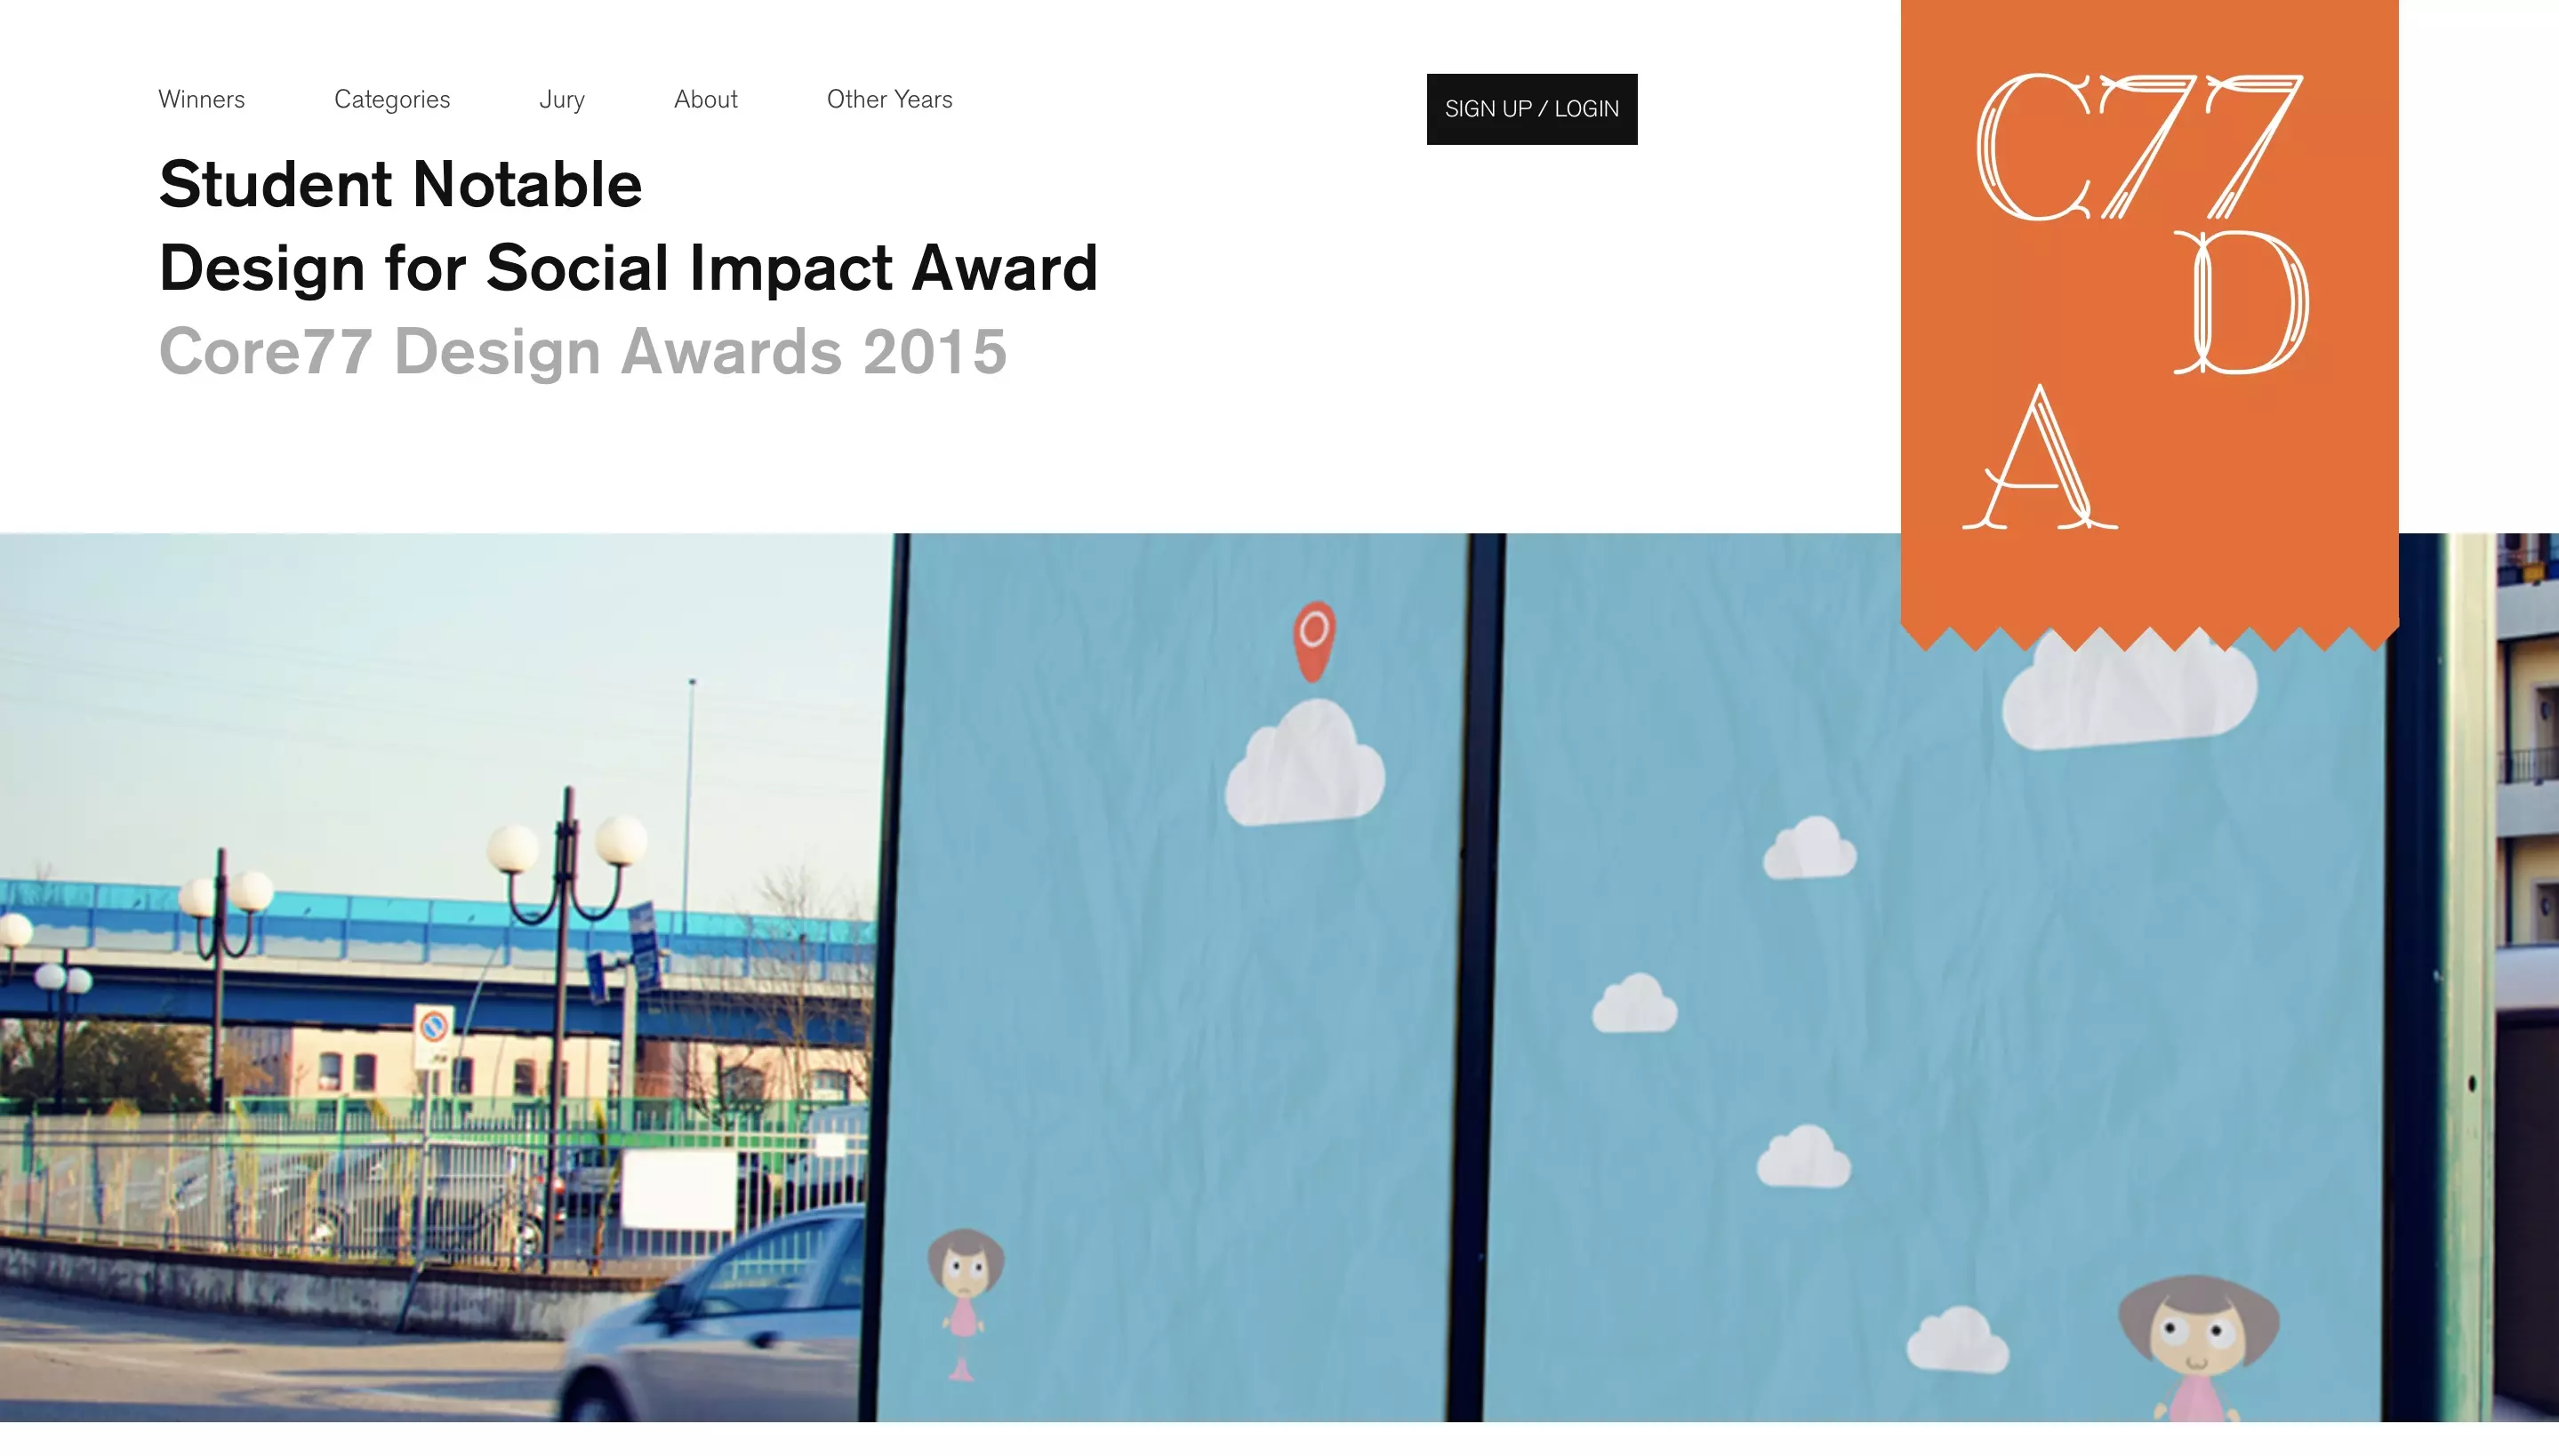 Project Dao was a Student Notable: Design for Social Impact at the Core 77 Design Awards in 2015.